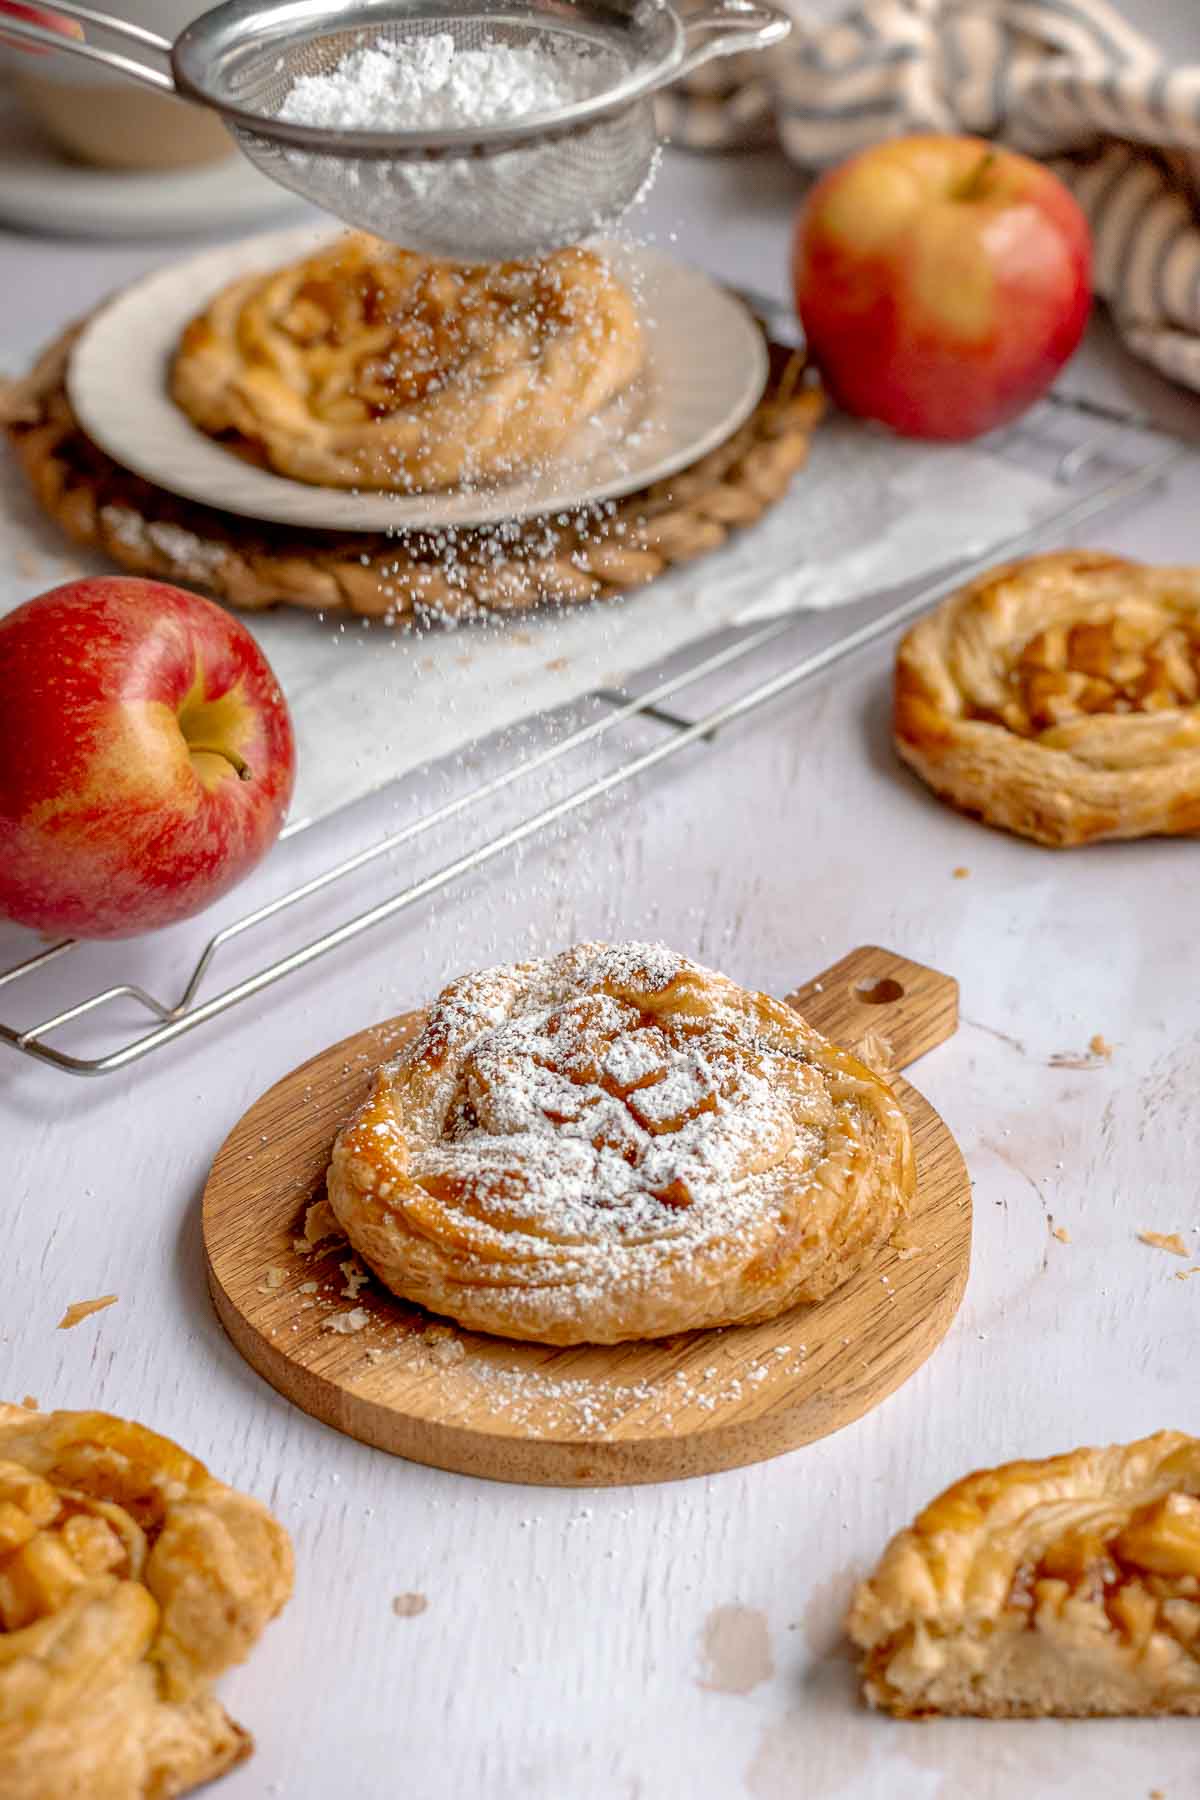 Powdered sugar being dusted on top of an apple danish.